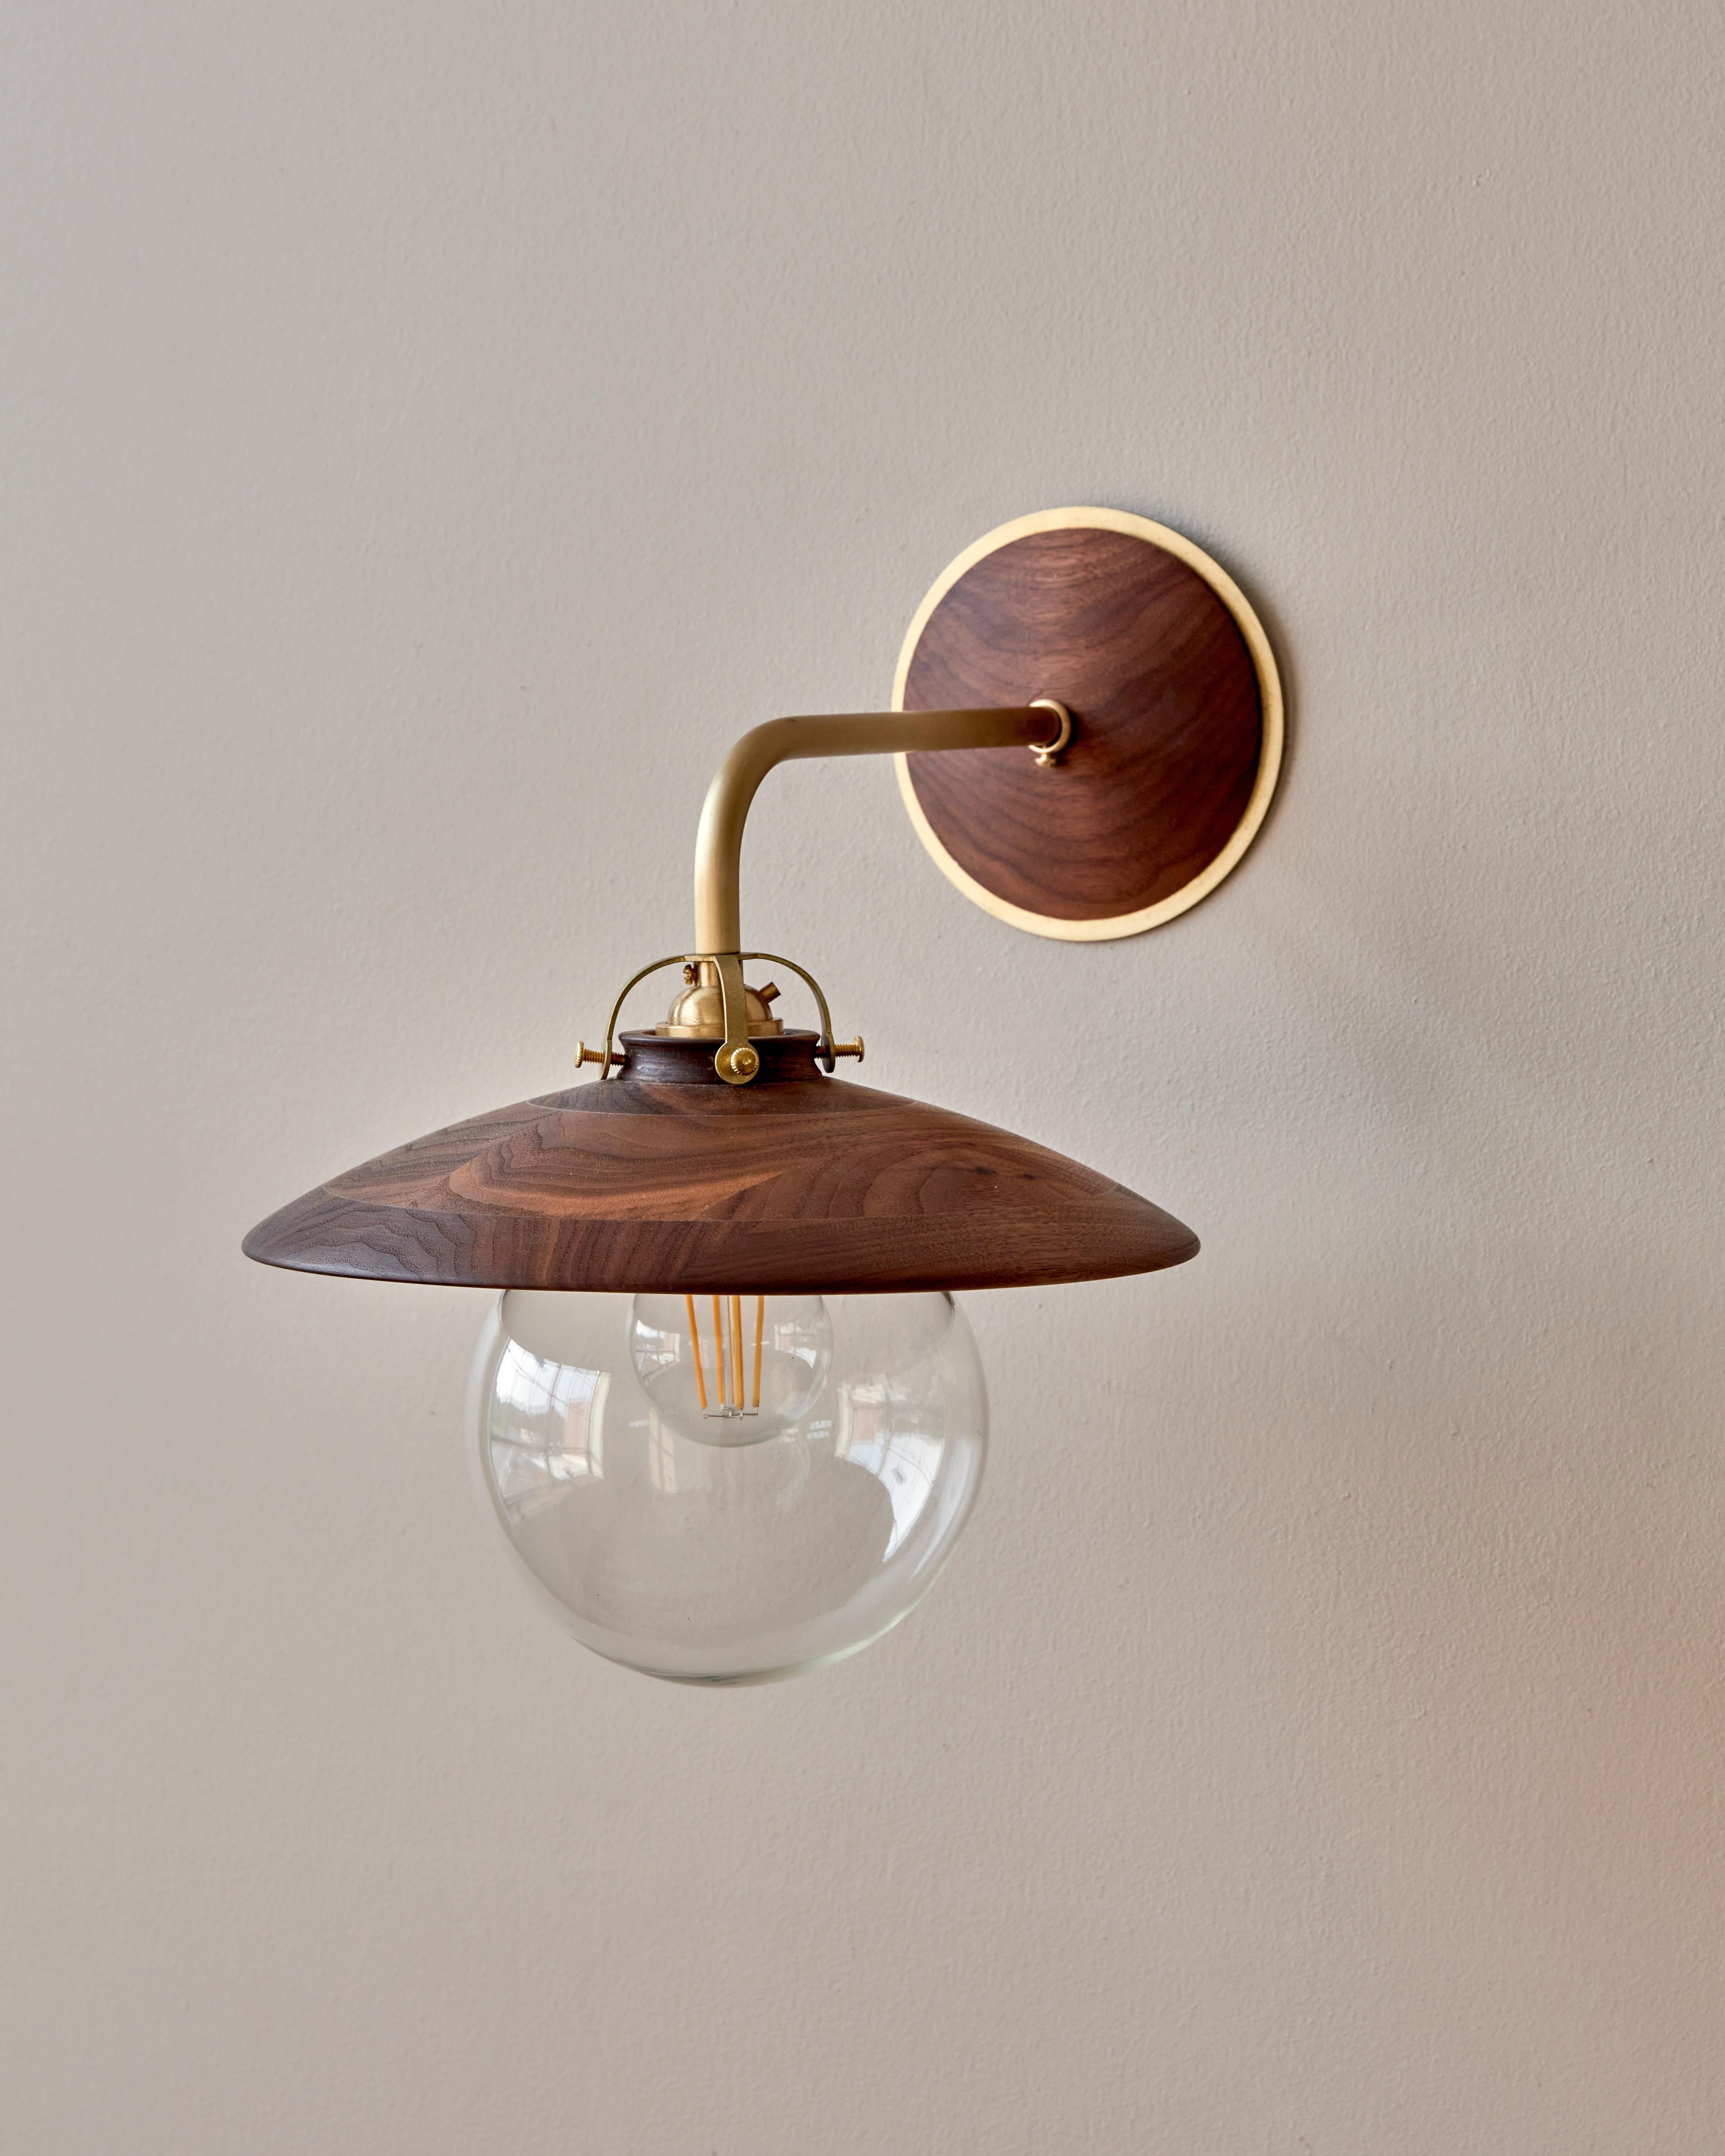 The Edmund sconce adopts the charismatic details from our beloved Edmund Pendant with its distinctive and charming shape. The hand-turned shade and oversized clear globe create a playful Silhouette while delicate cut brass fittings and hardware are